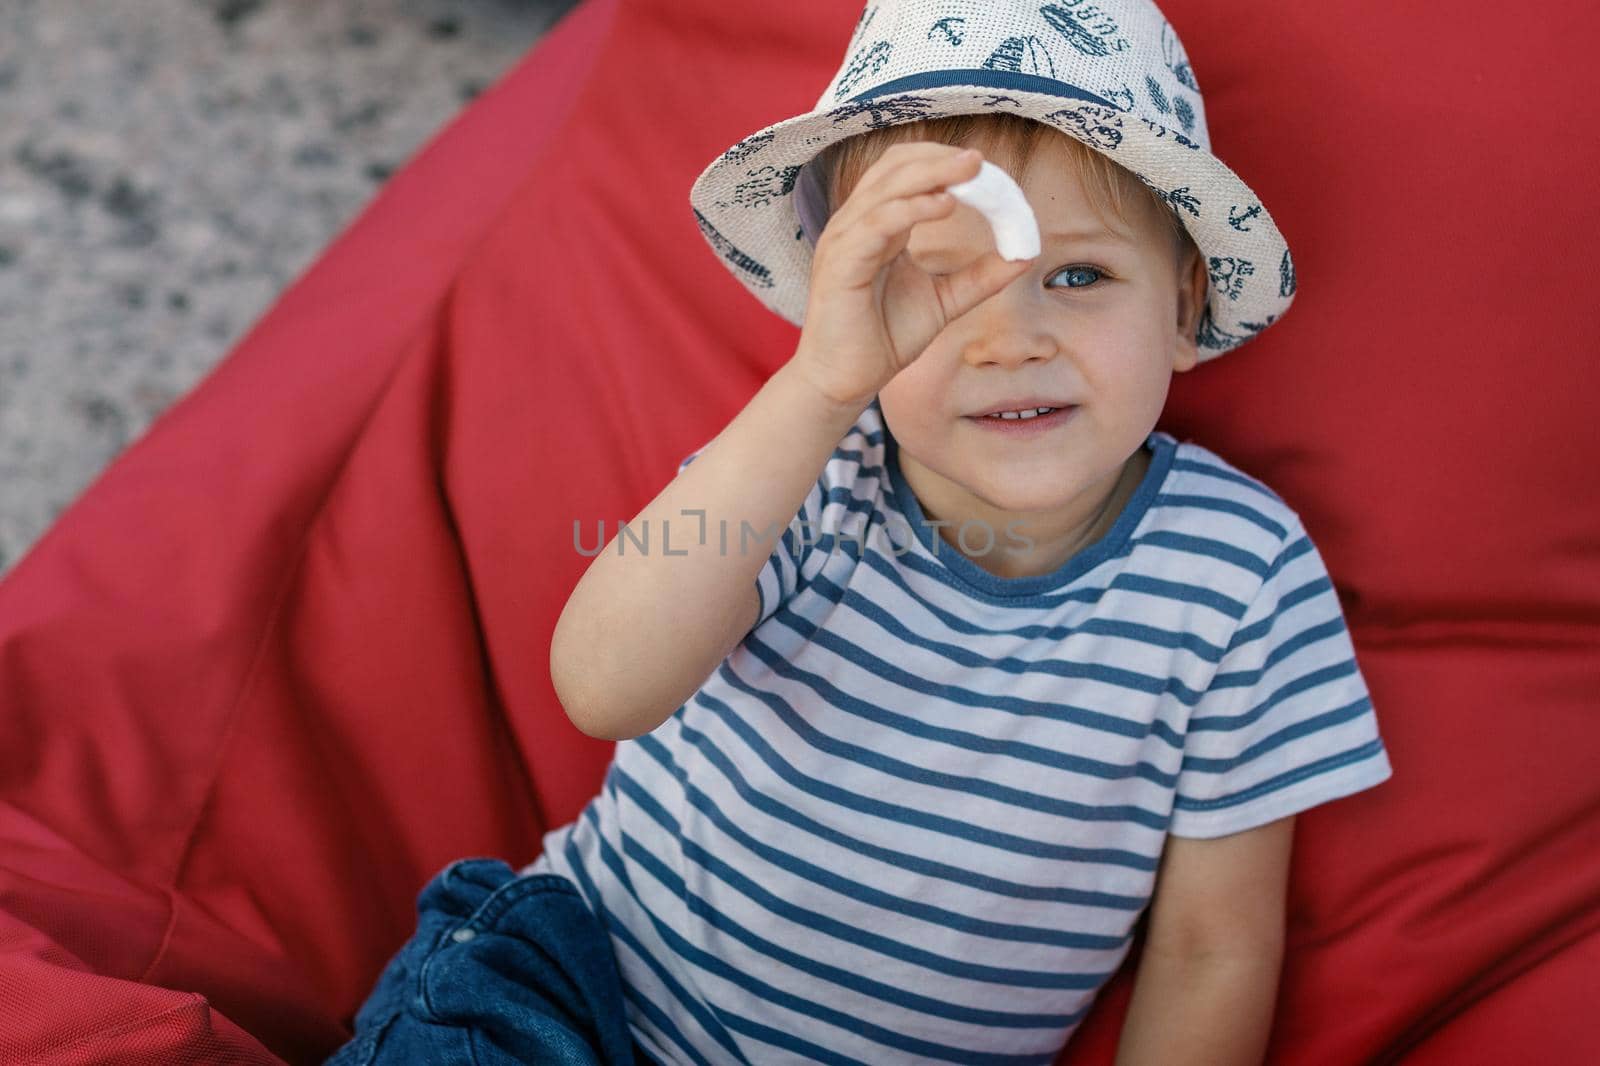 A little boy in a striped shirt and hat on a red background by Lincikas